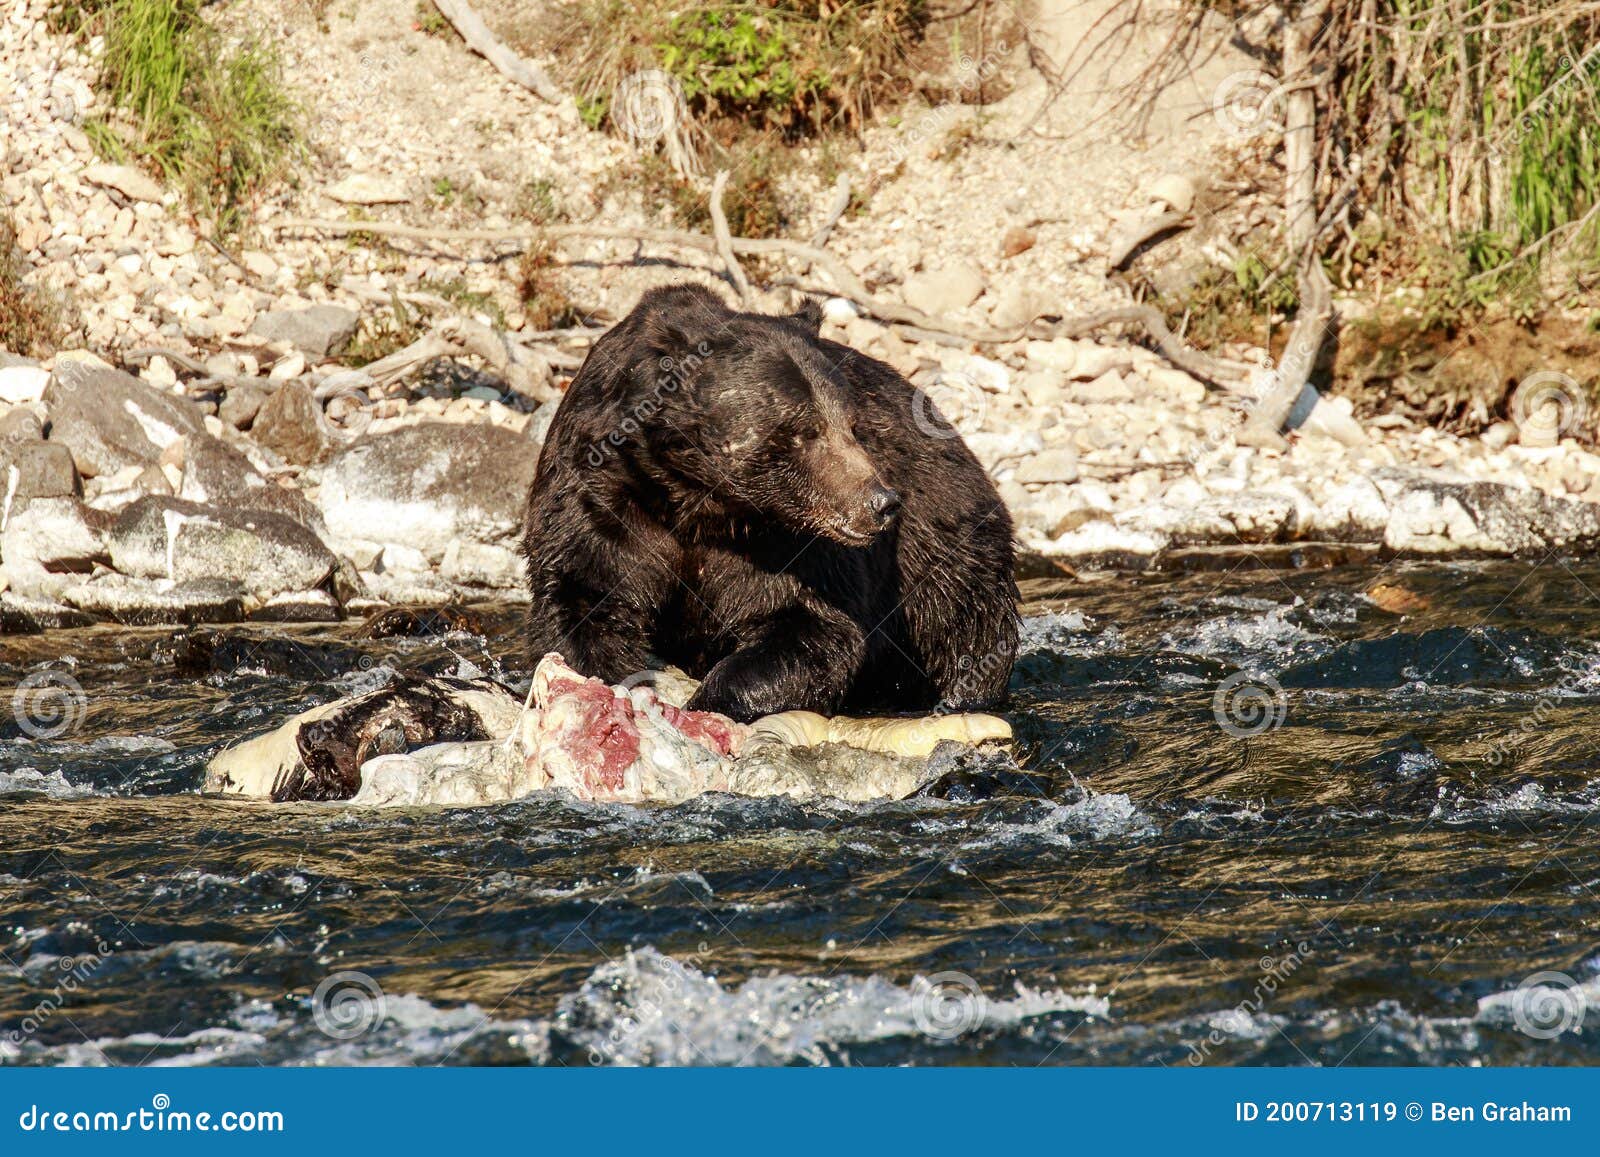 Grizzly Yellowstone River Stock Image - Image of wildlife, buffalo: